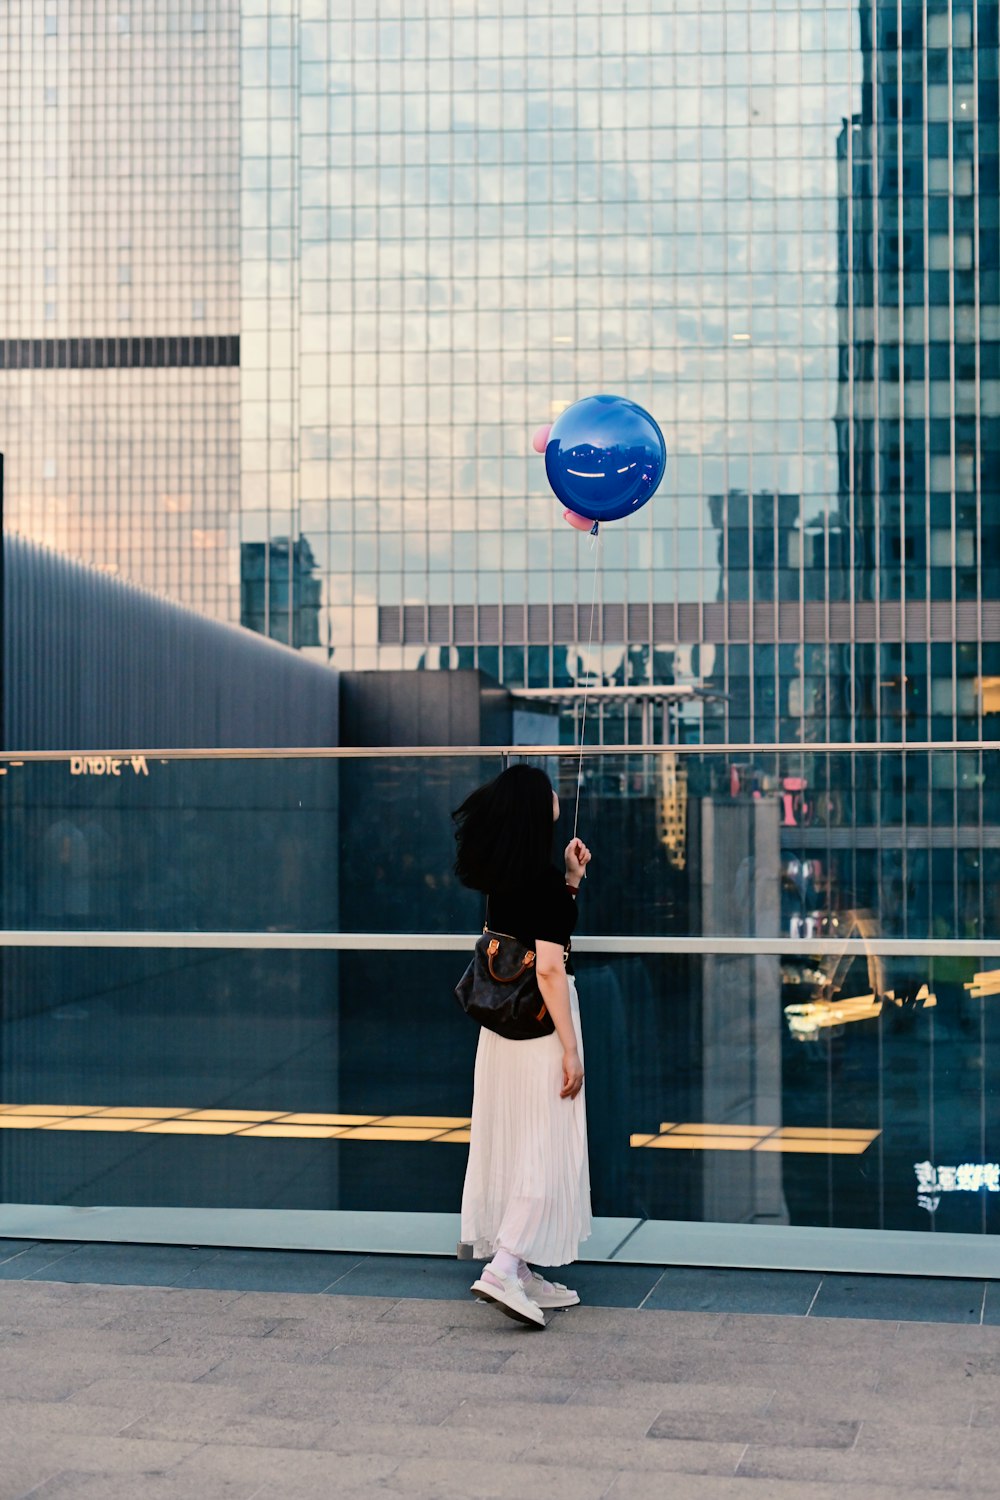 a woman in a white dress is flying a blue balloon